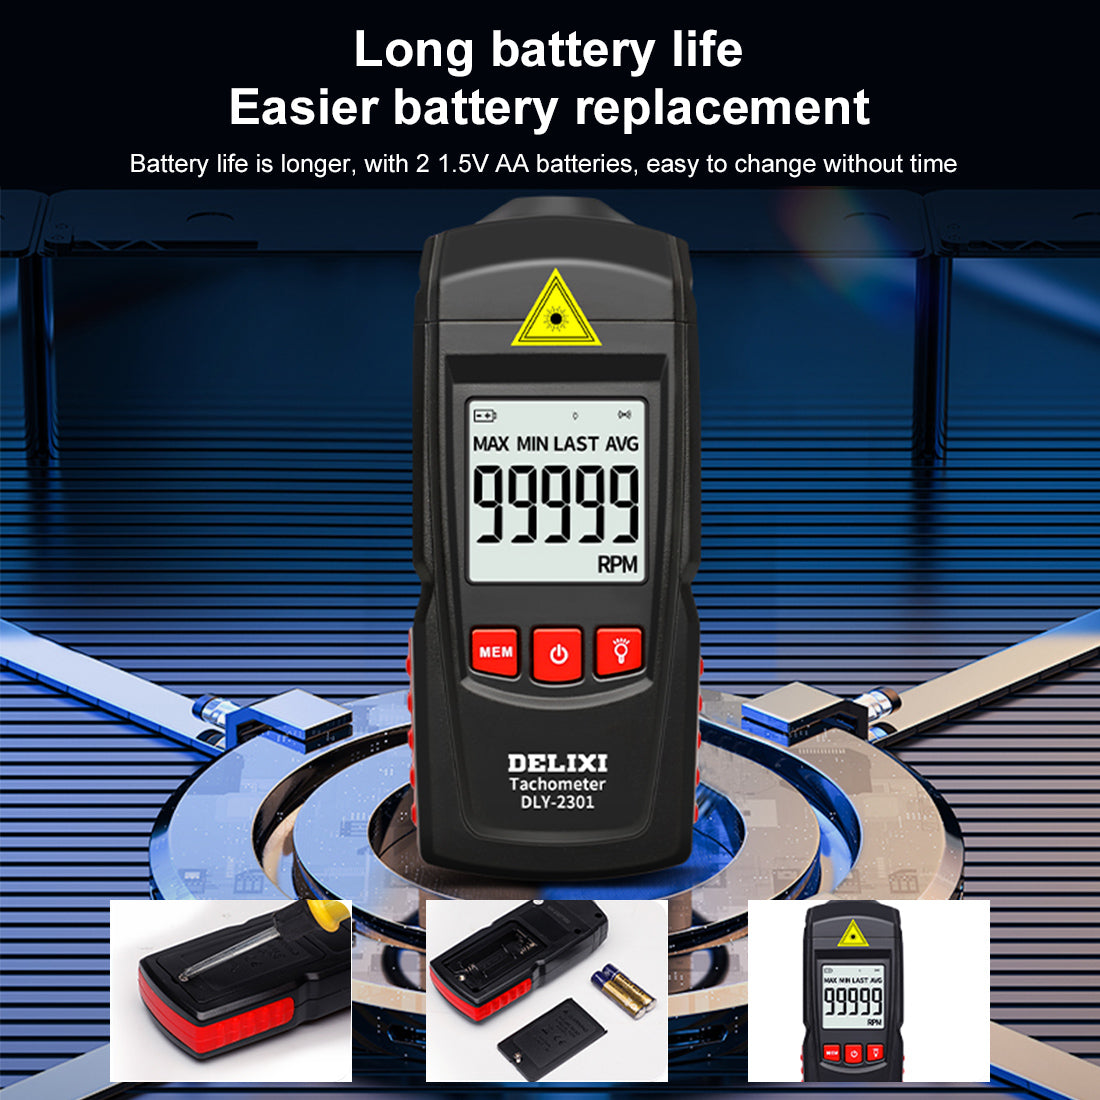 Digital Tachometer Tester Noncontact Laser Photo Sensor for Model Engine  with 2.5 to 99,999 RPM Accuracy - Stirlingkit